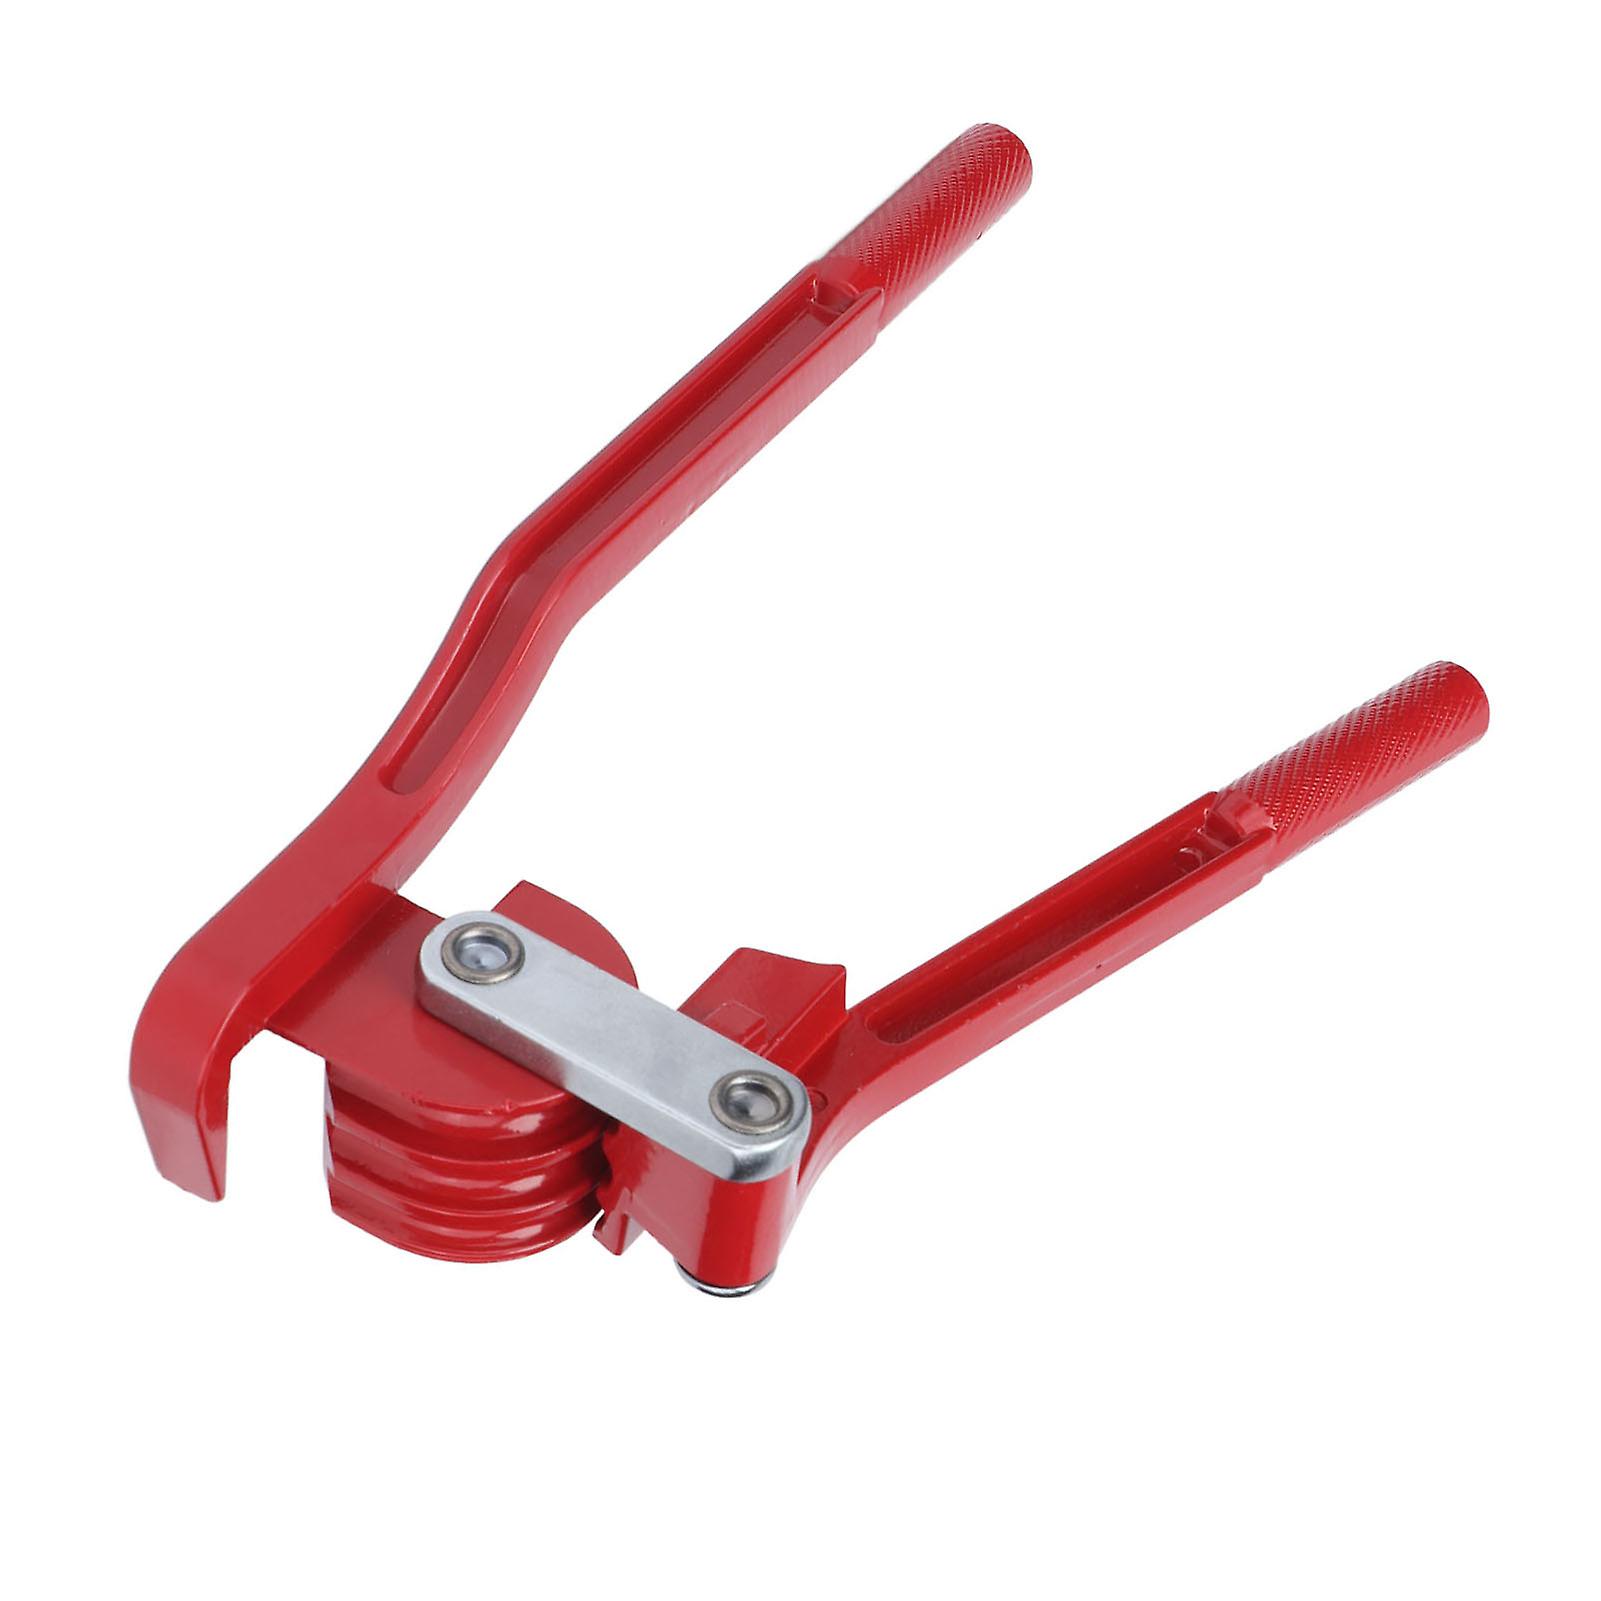 Pipe Tubing Bender Red Manual Alloy Steel Tube Bending Tools For Construction Sites